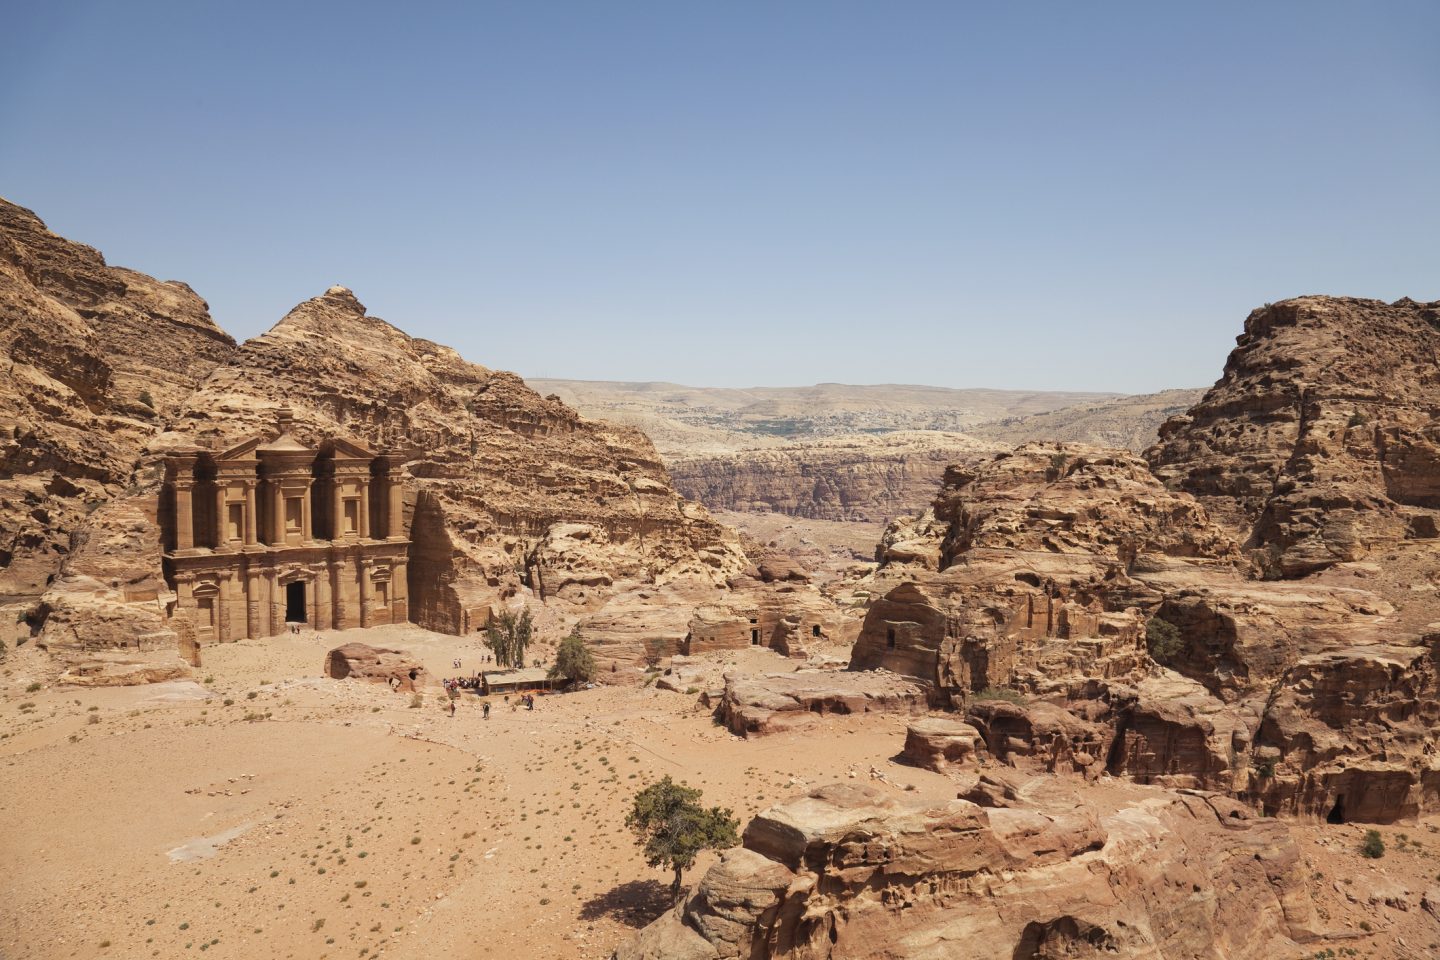 The towering monastery of Petra is one of the most well known archaeological sites found in Jordan.